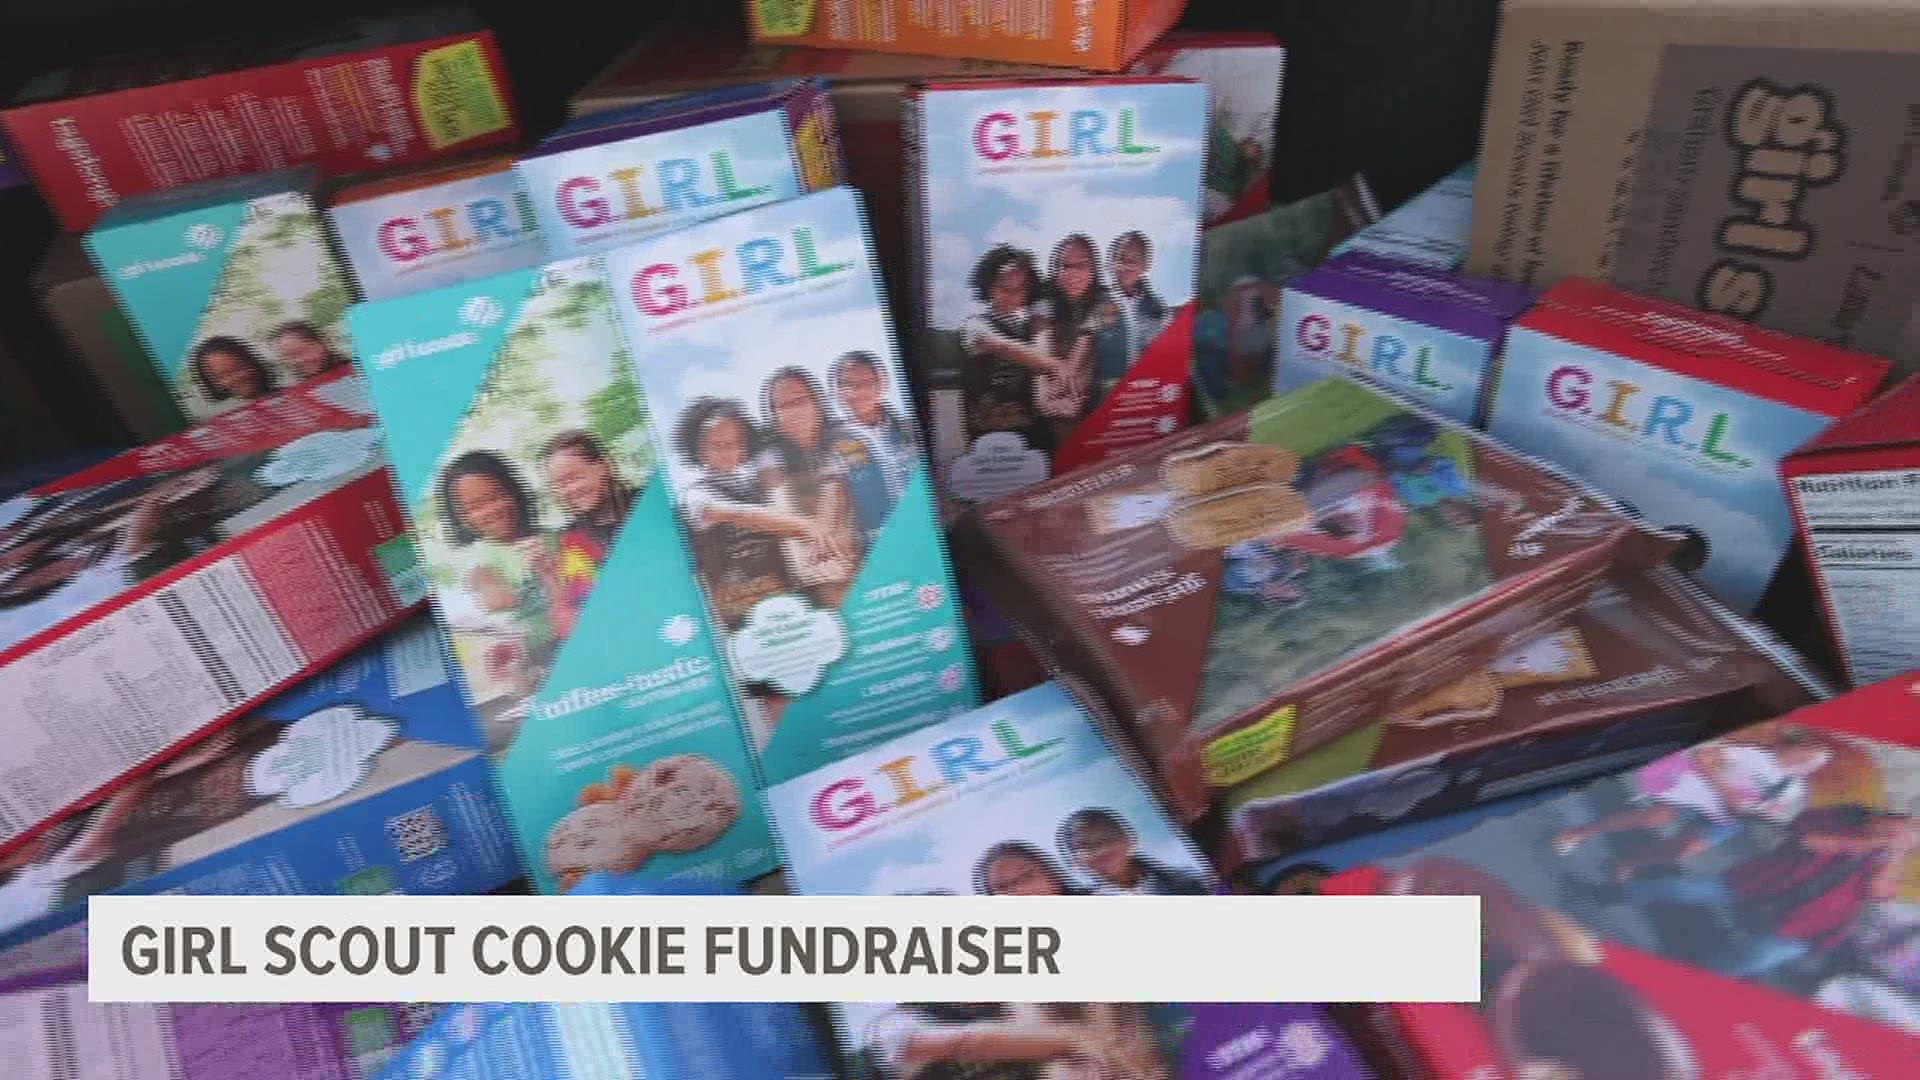 During the event, a Stetler Dodge Chrysler Jeep was filled with boxes of Girl Scout Cookies